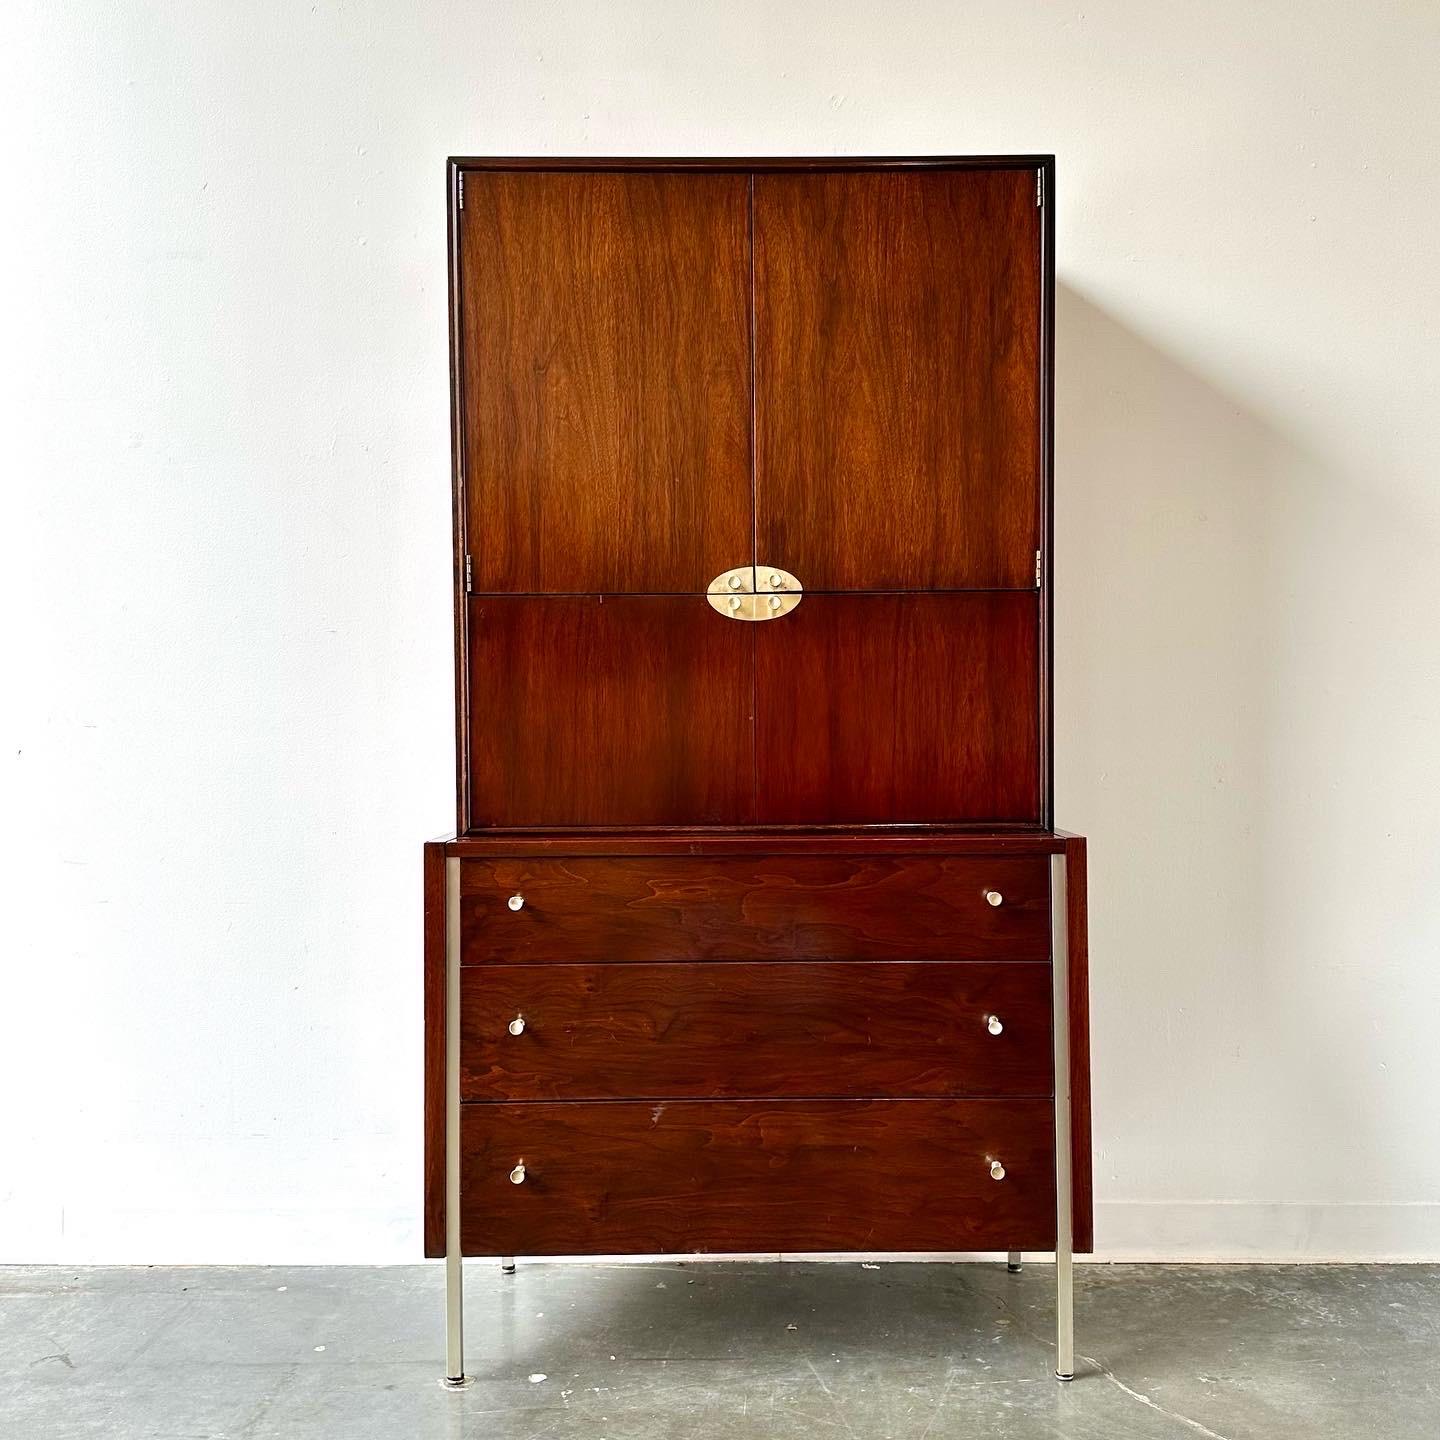 Rare highboy cabinet by Mengel furniture 

Designed by Raymond Loewy circa 1950

Gorgeous piece with loads of storage.
Three large drawers, drop down cabinet , and storage space up top.

Great condition with minor signs of wear.

Dimensions:
36L x